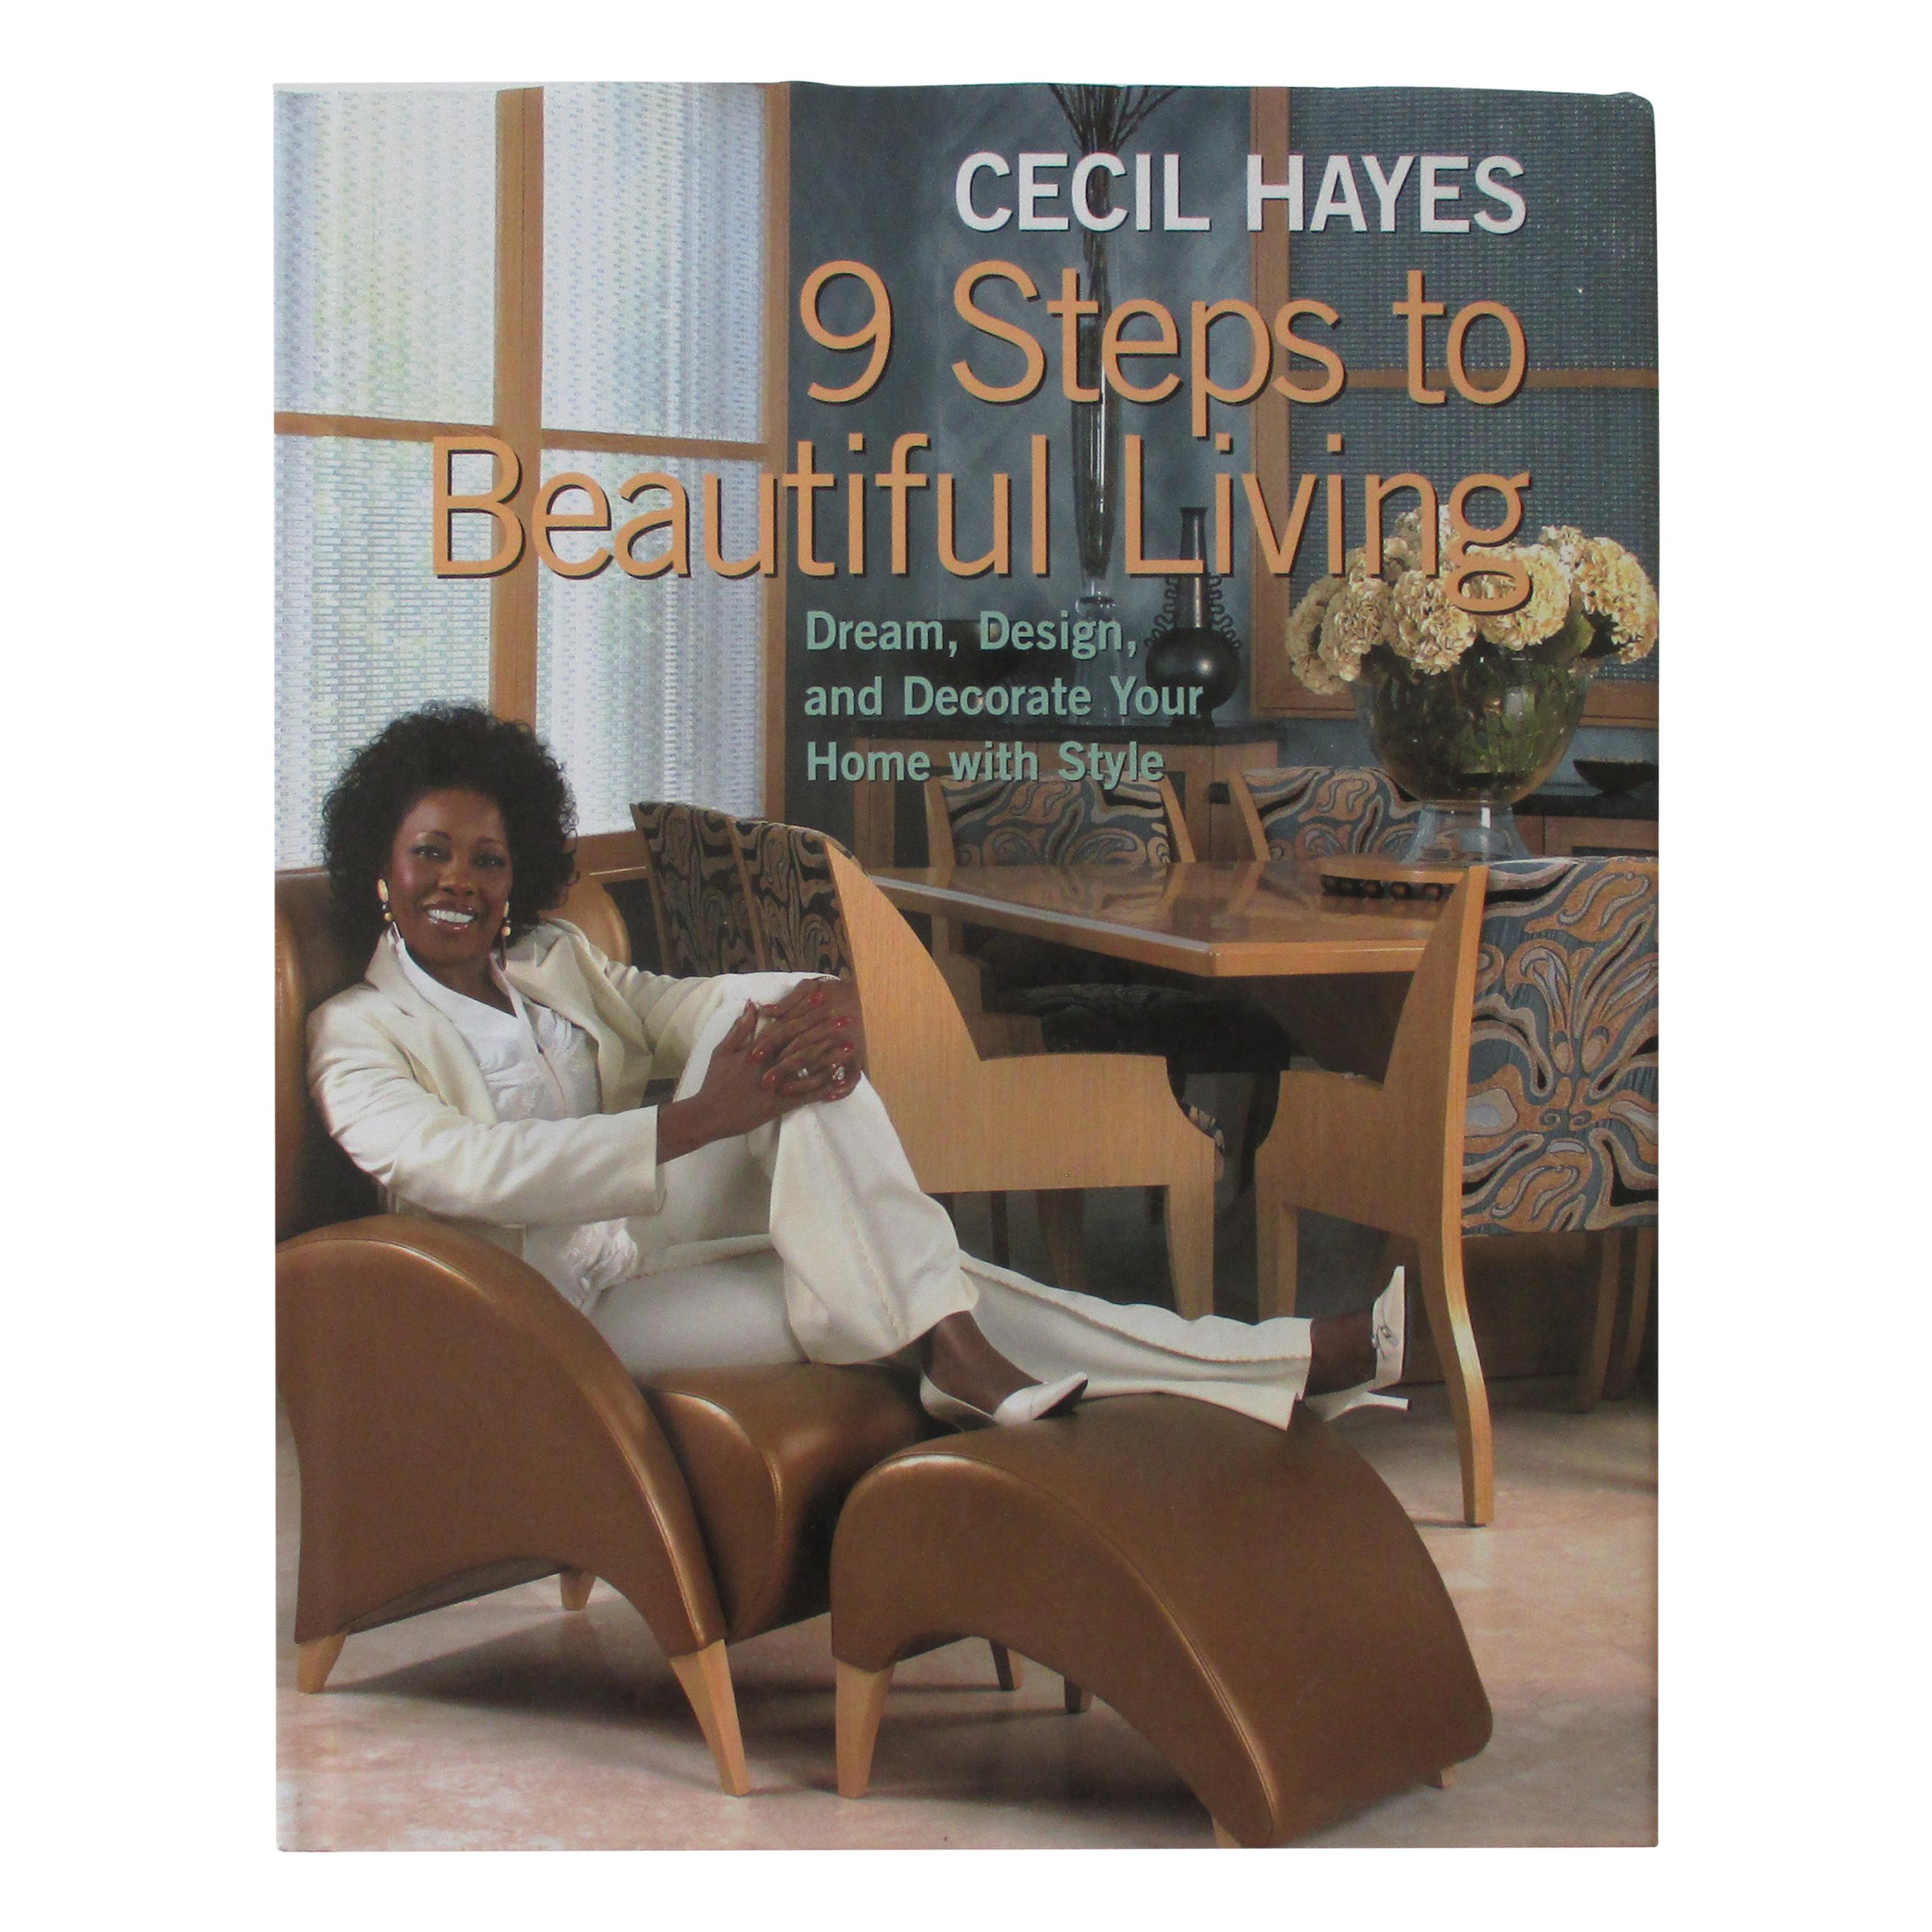 9 Steps to Beautiful Living Book by Cecil Hayes